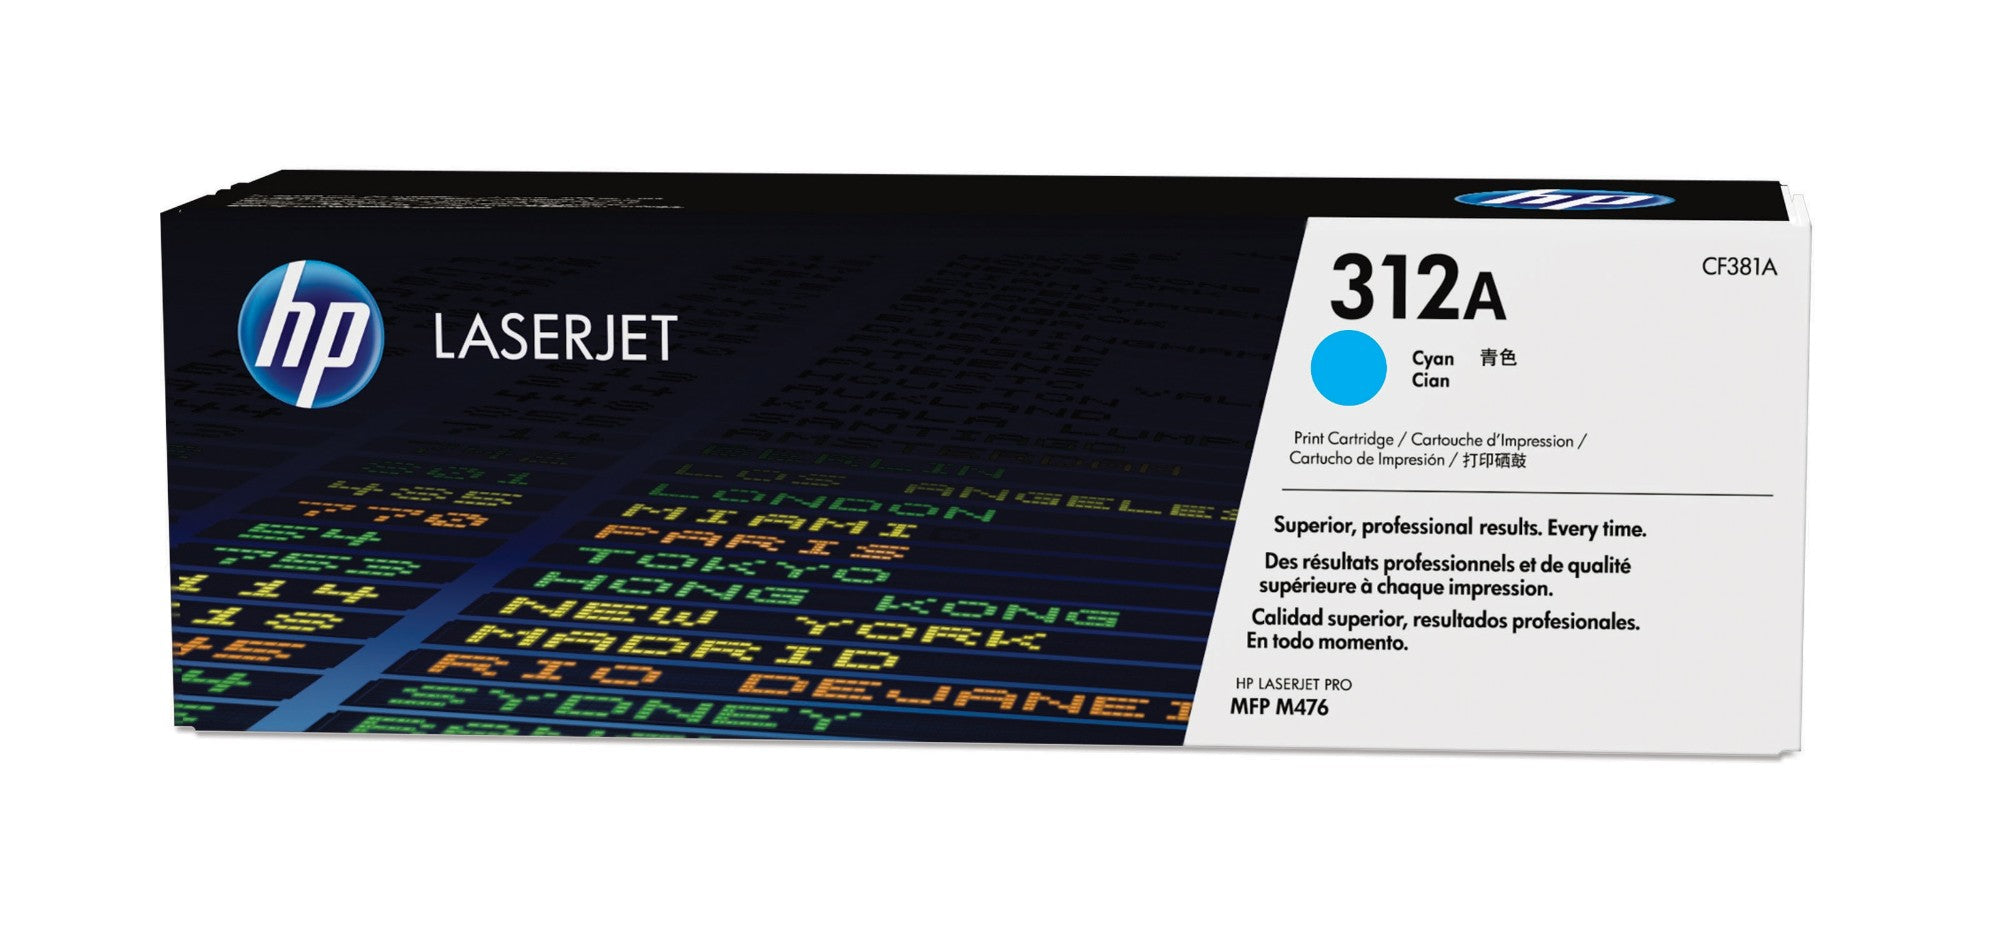 HP CF381A/312A Toner cartridge cyan, 2.7K pages ISO/IEC 19798 for HP CLJ Pro M 476